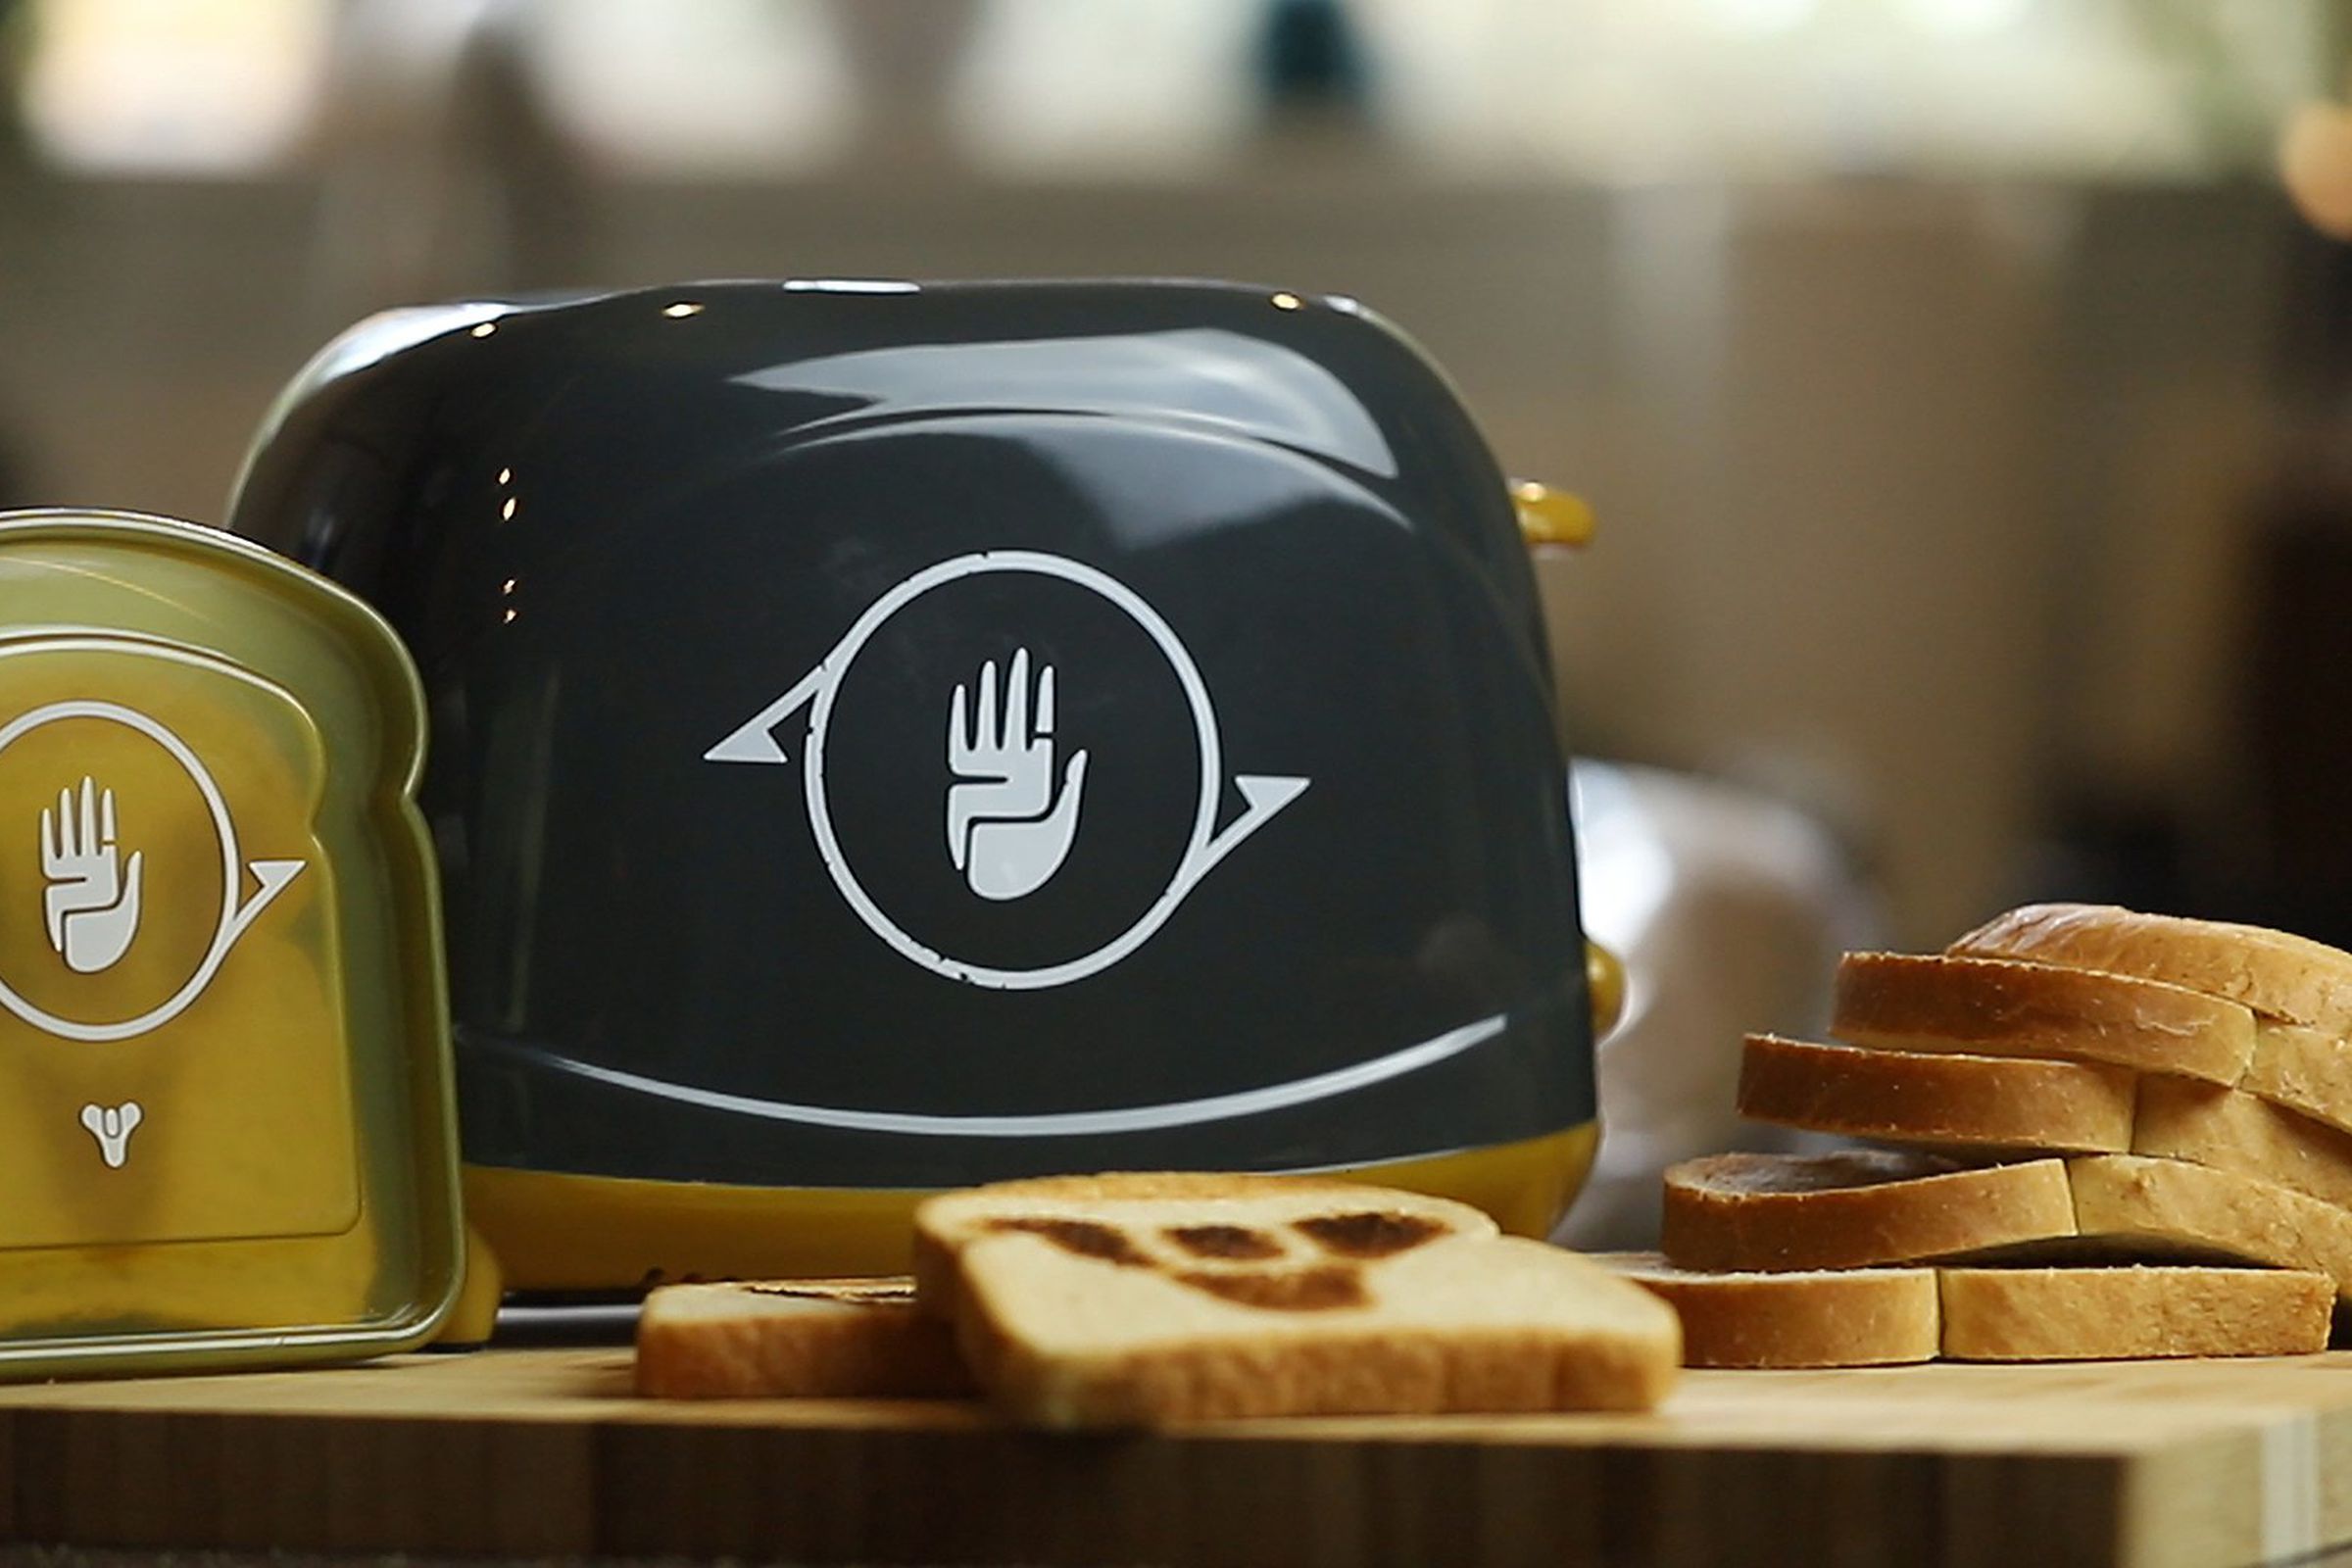 The Destiny Toaster in all its glory. 